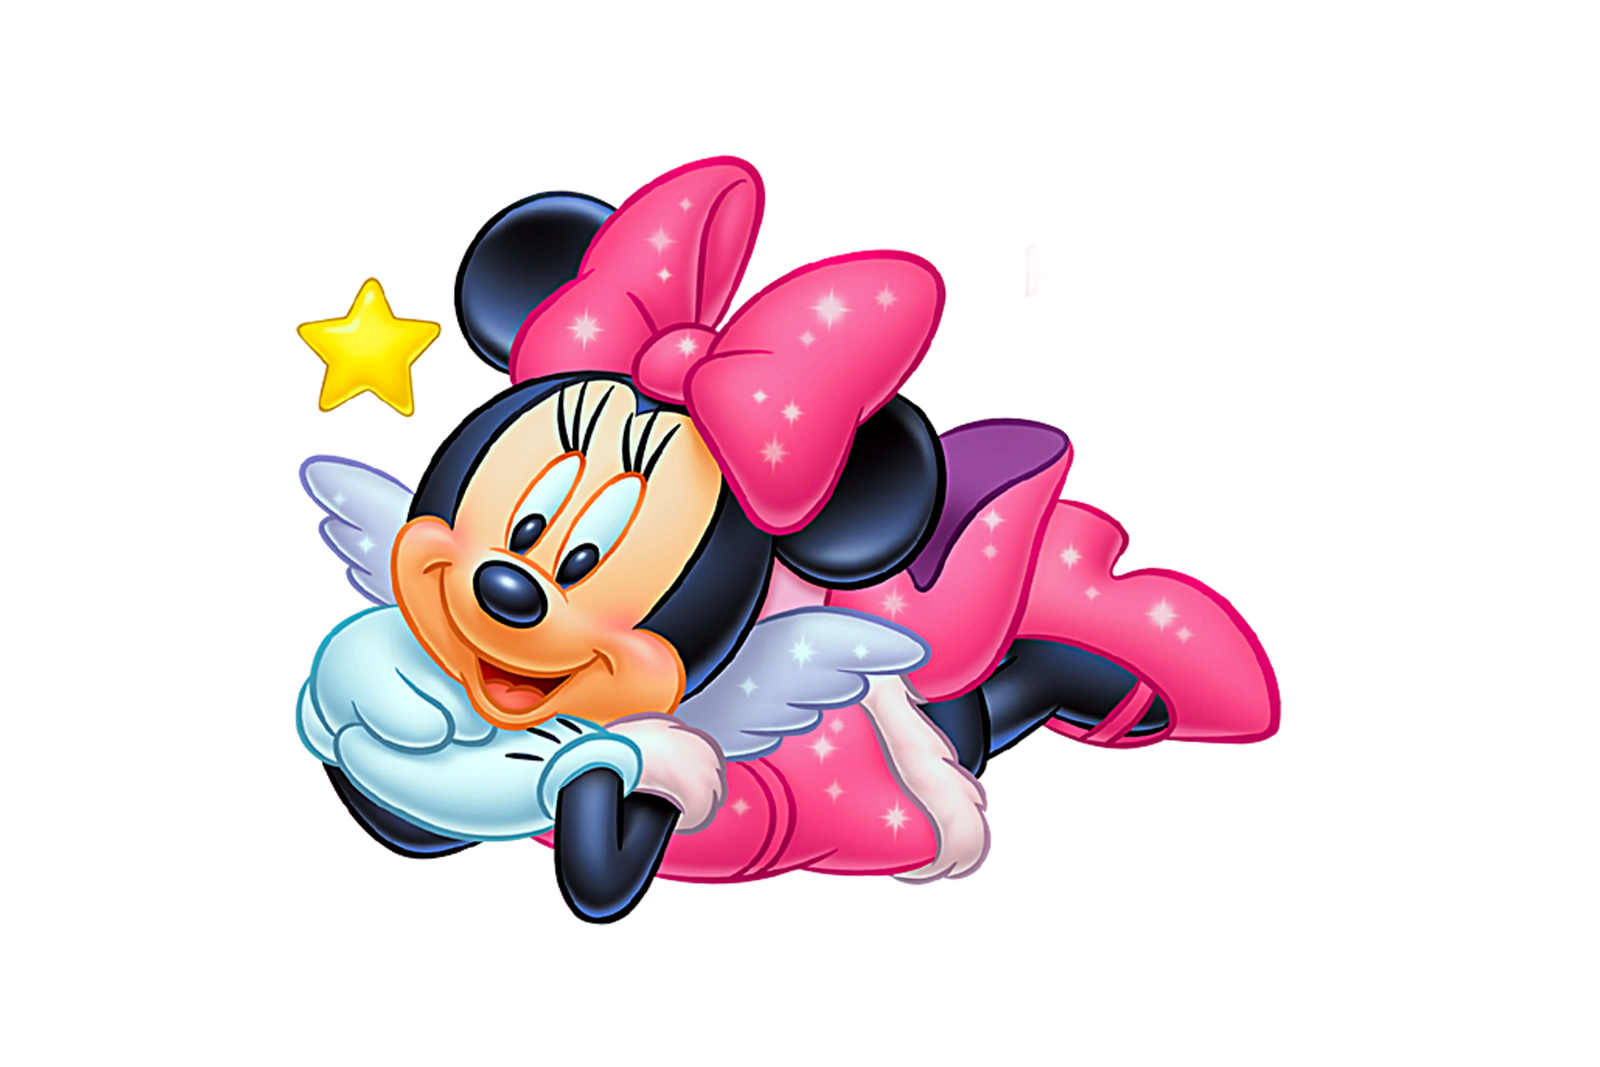 Download Free High quality Minnie Mouse Png Transparent Images